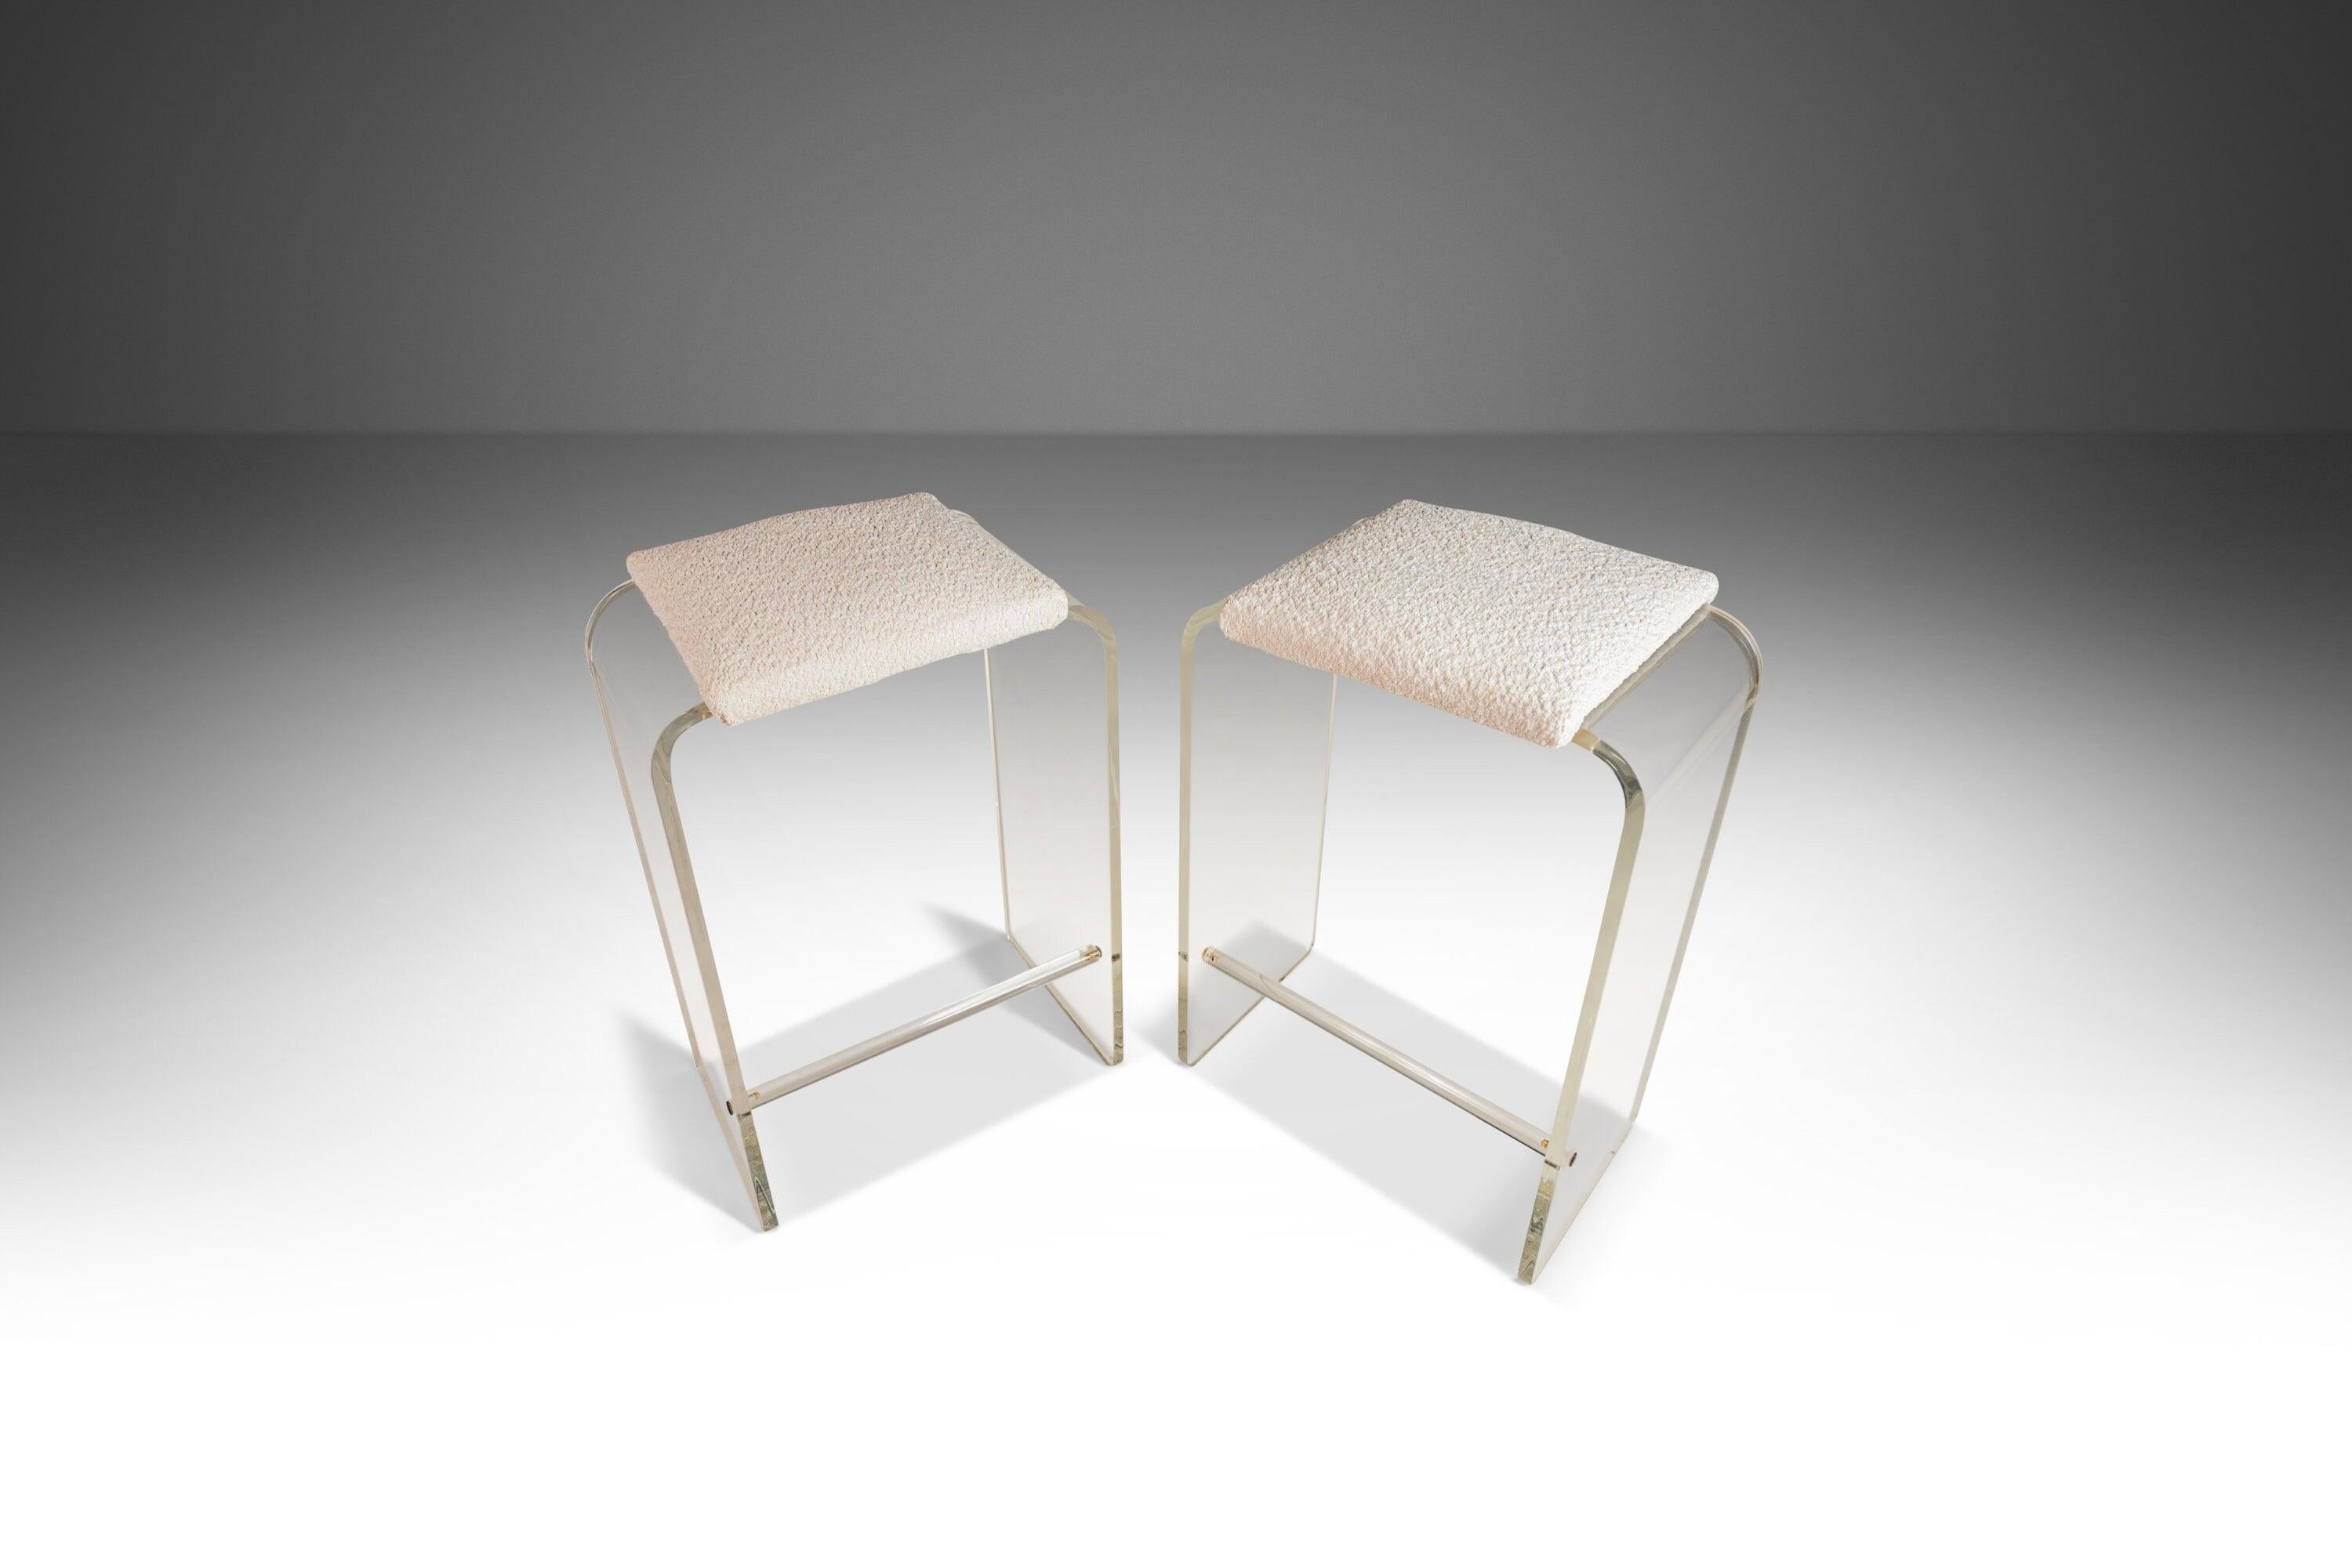 Equal parts elegance and aesthetically captivating this extraordinary set of barstools is the epitome of Hollywood Regency. Constructed from solid polymethyl methacrylate (AKA lucite) and forged into a gorgeous waterfall shape these stools are